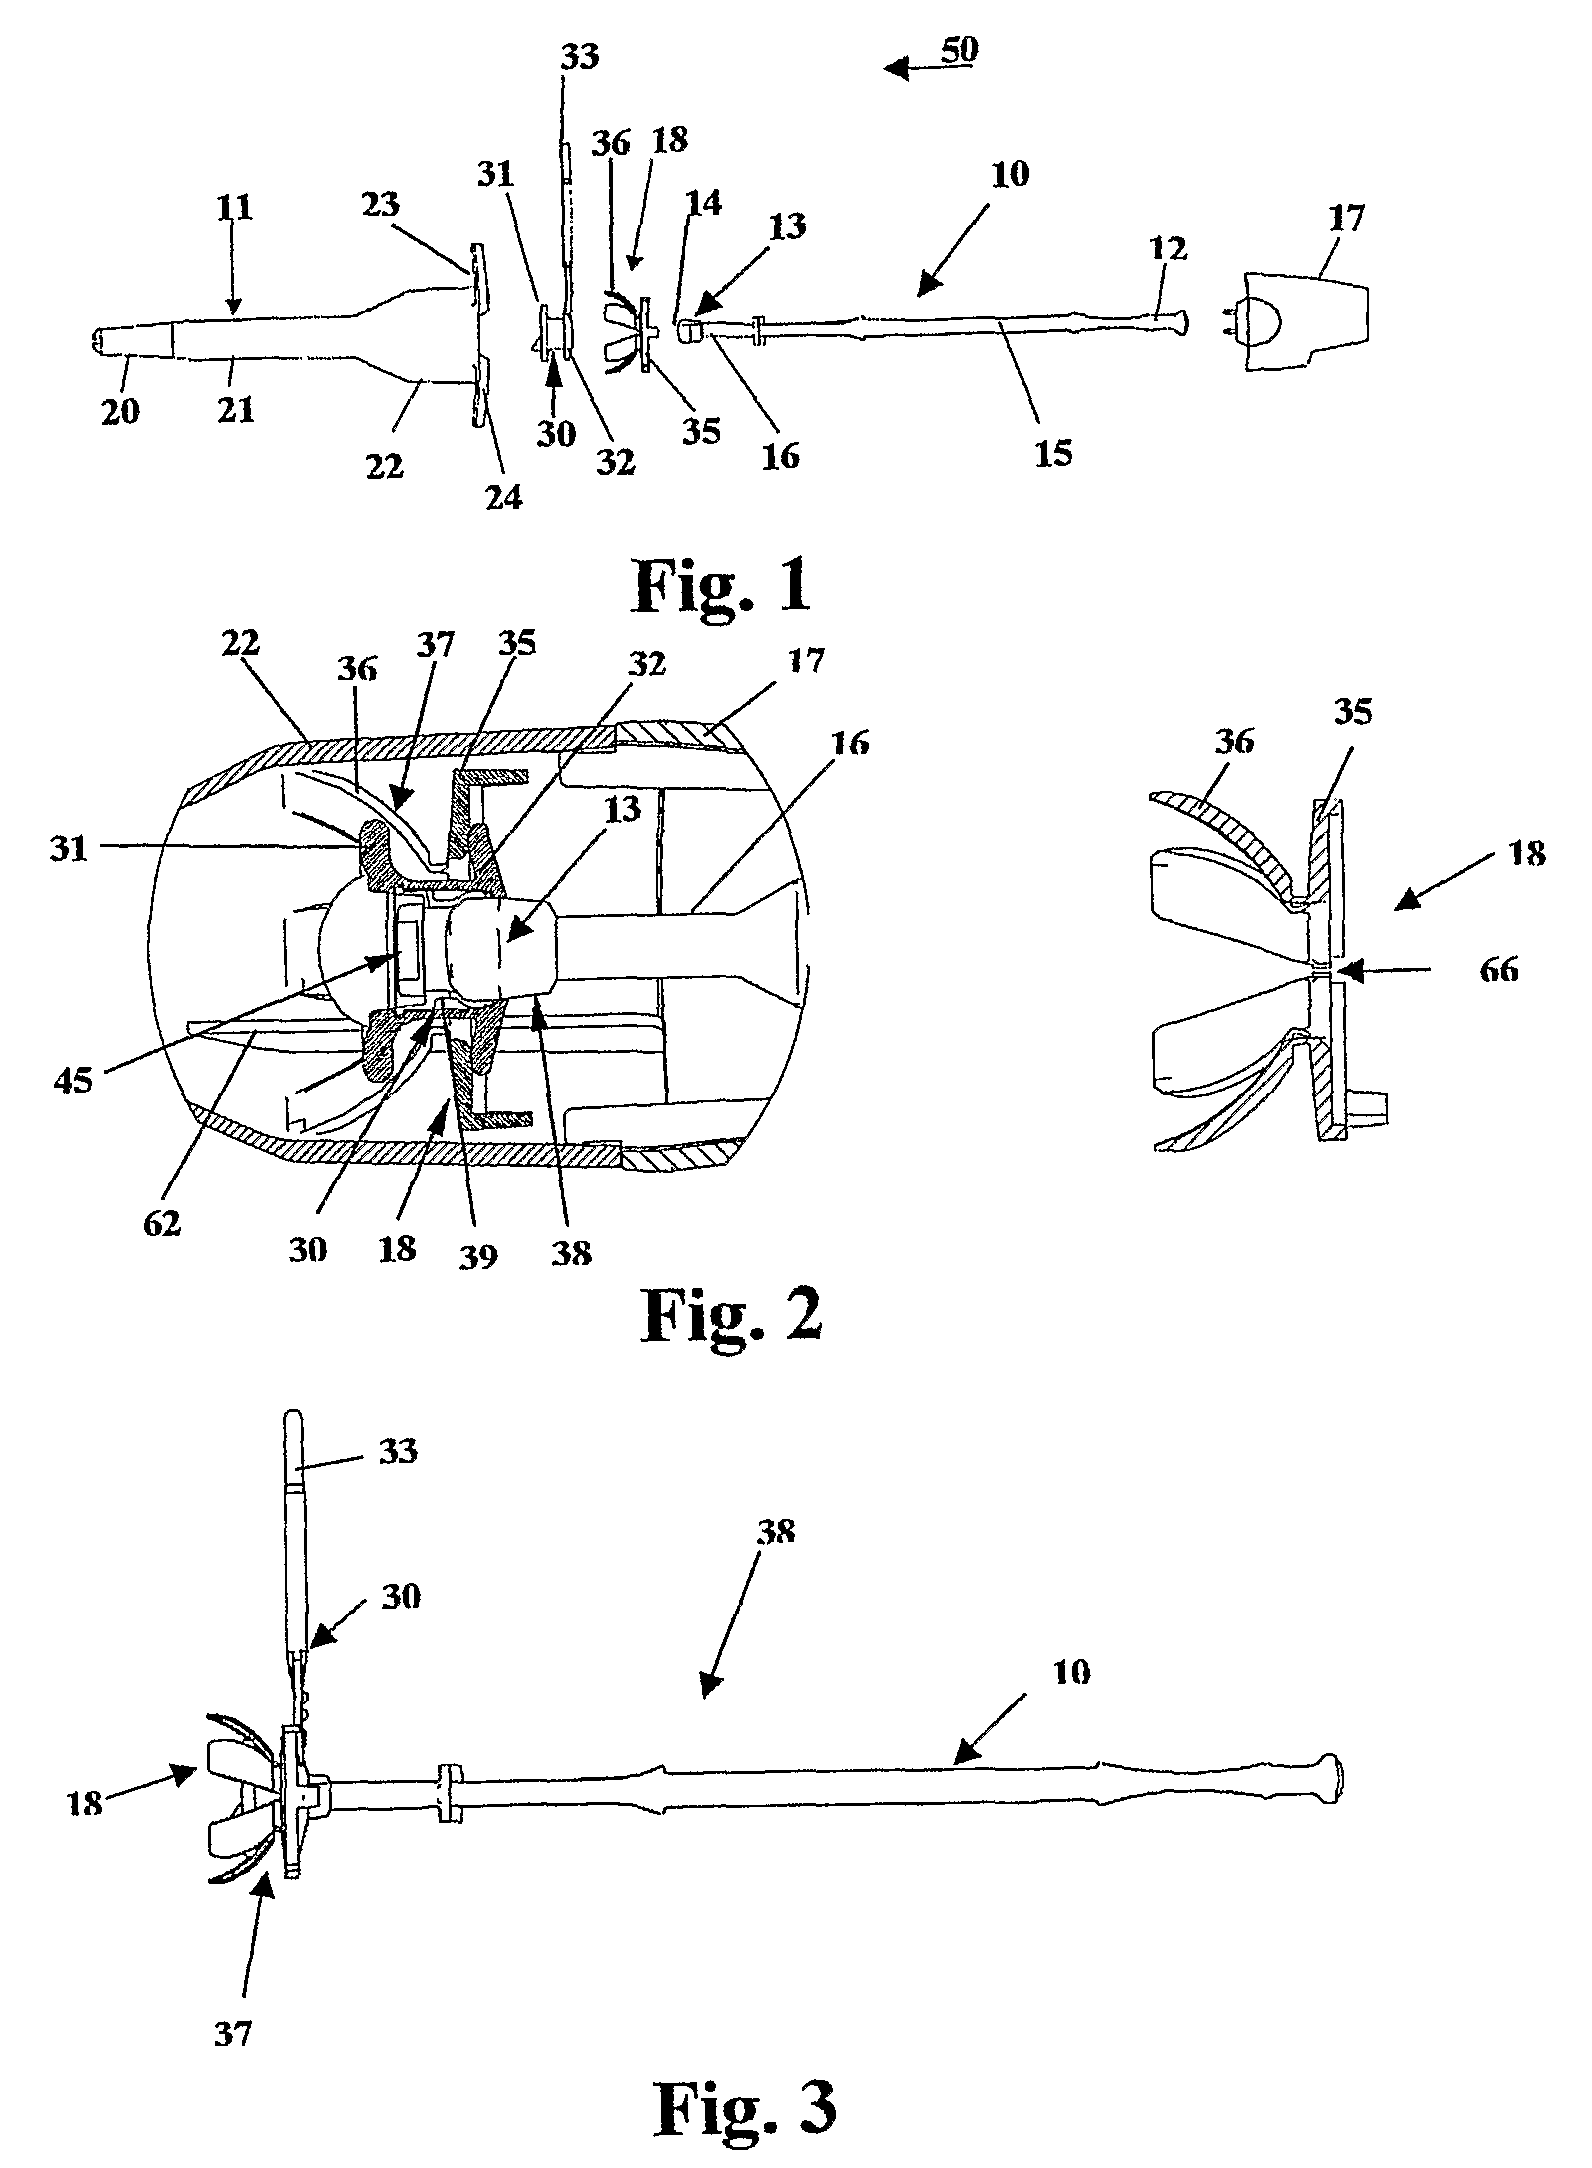 Method and device for securely loading and mounting a tubular device in a flexible wall and manufacturing method for said loading device